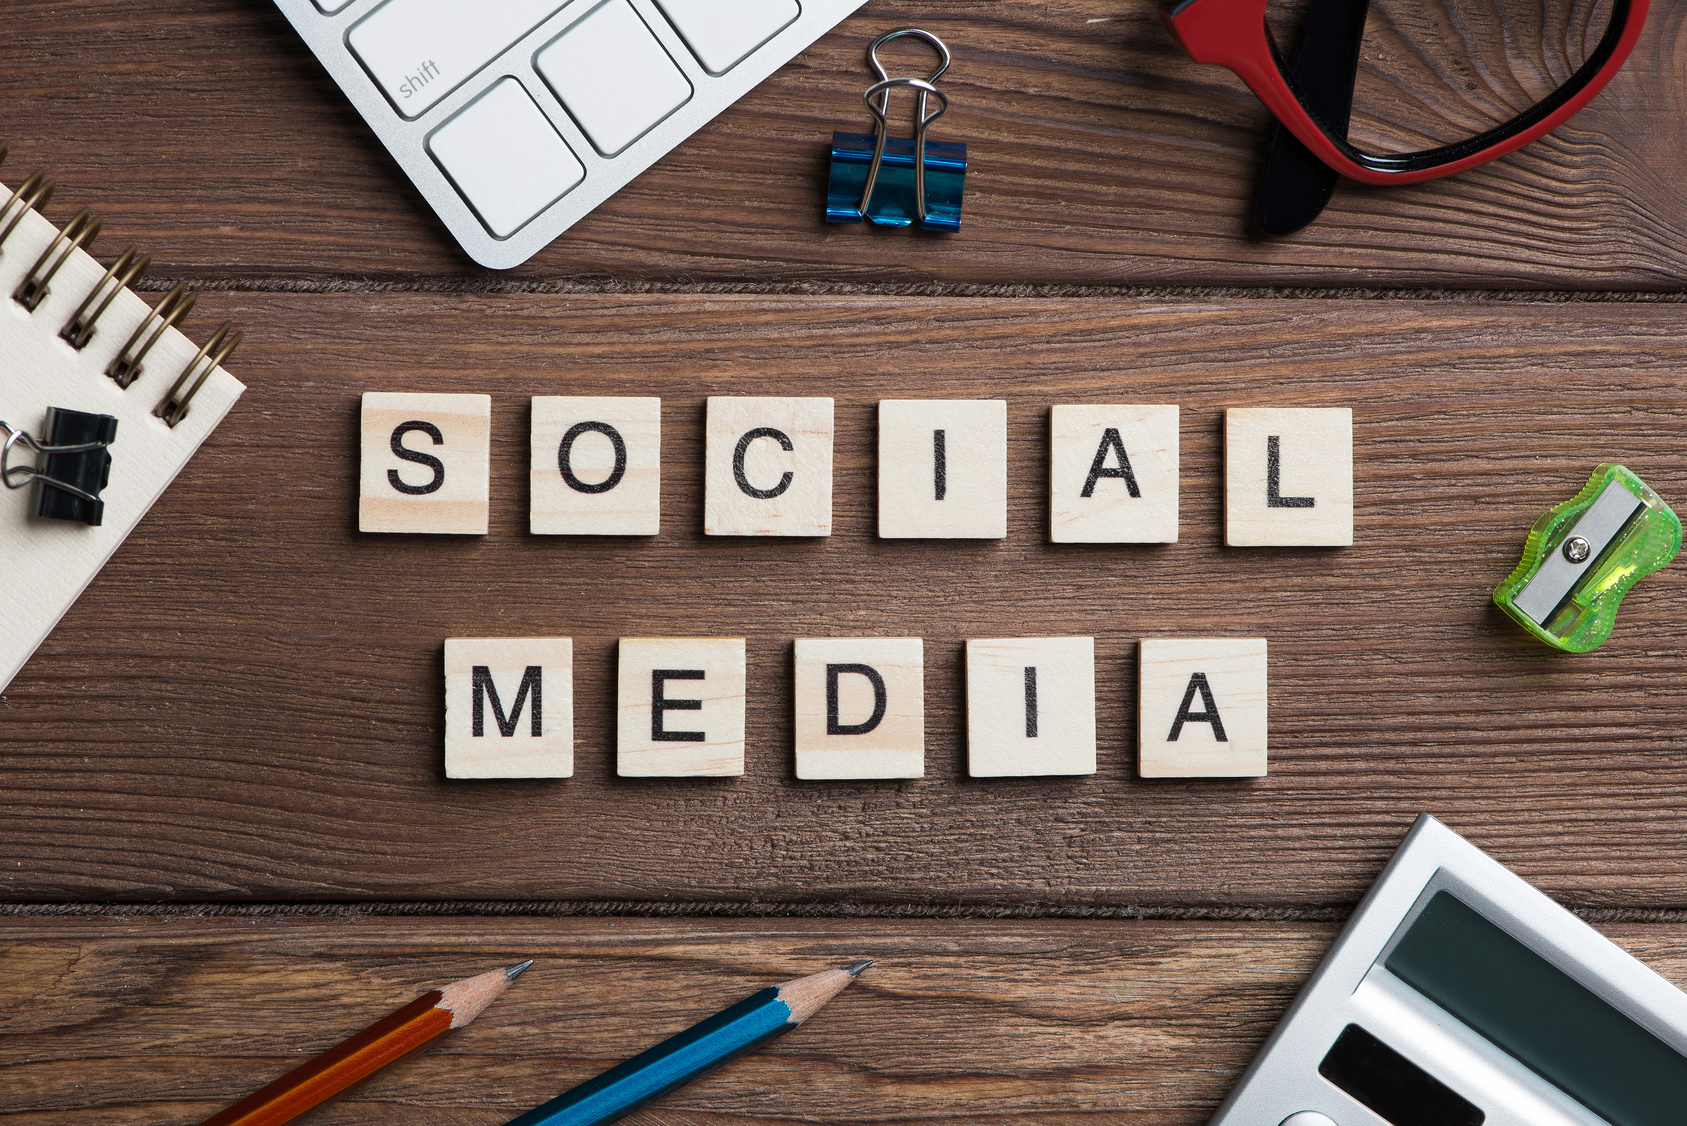 How to Use Social Media Marketing to Increase Conversions